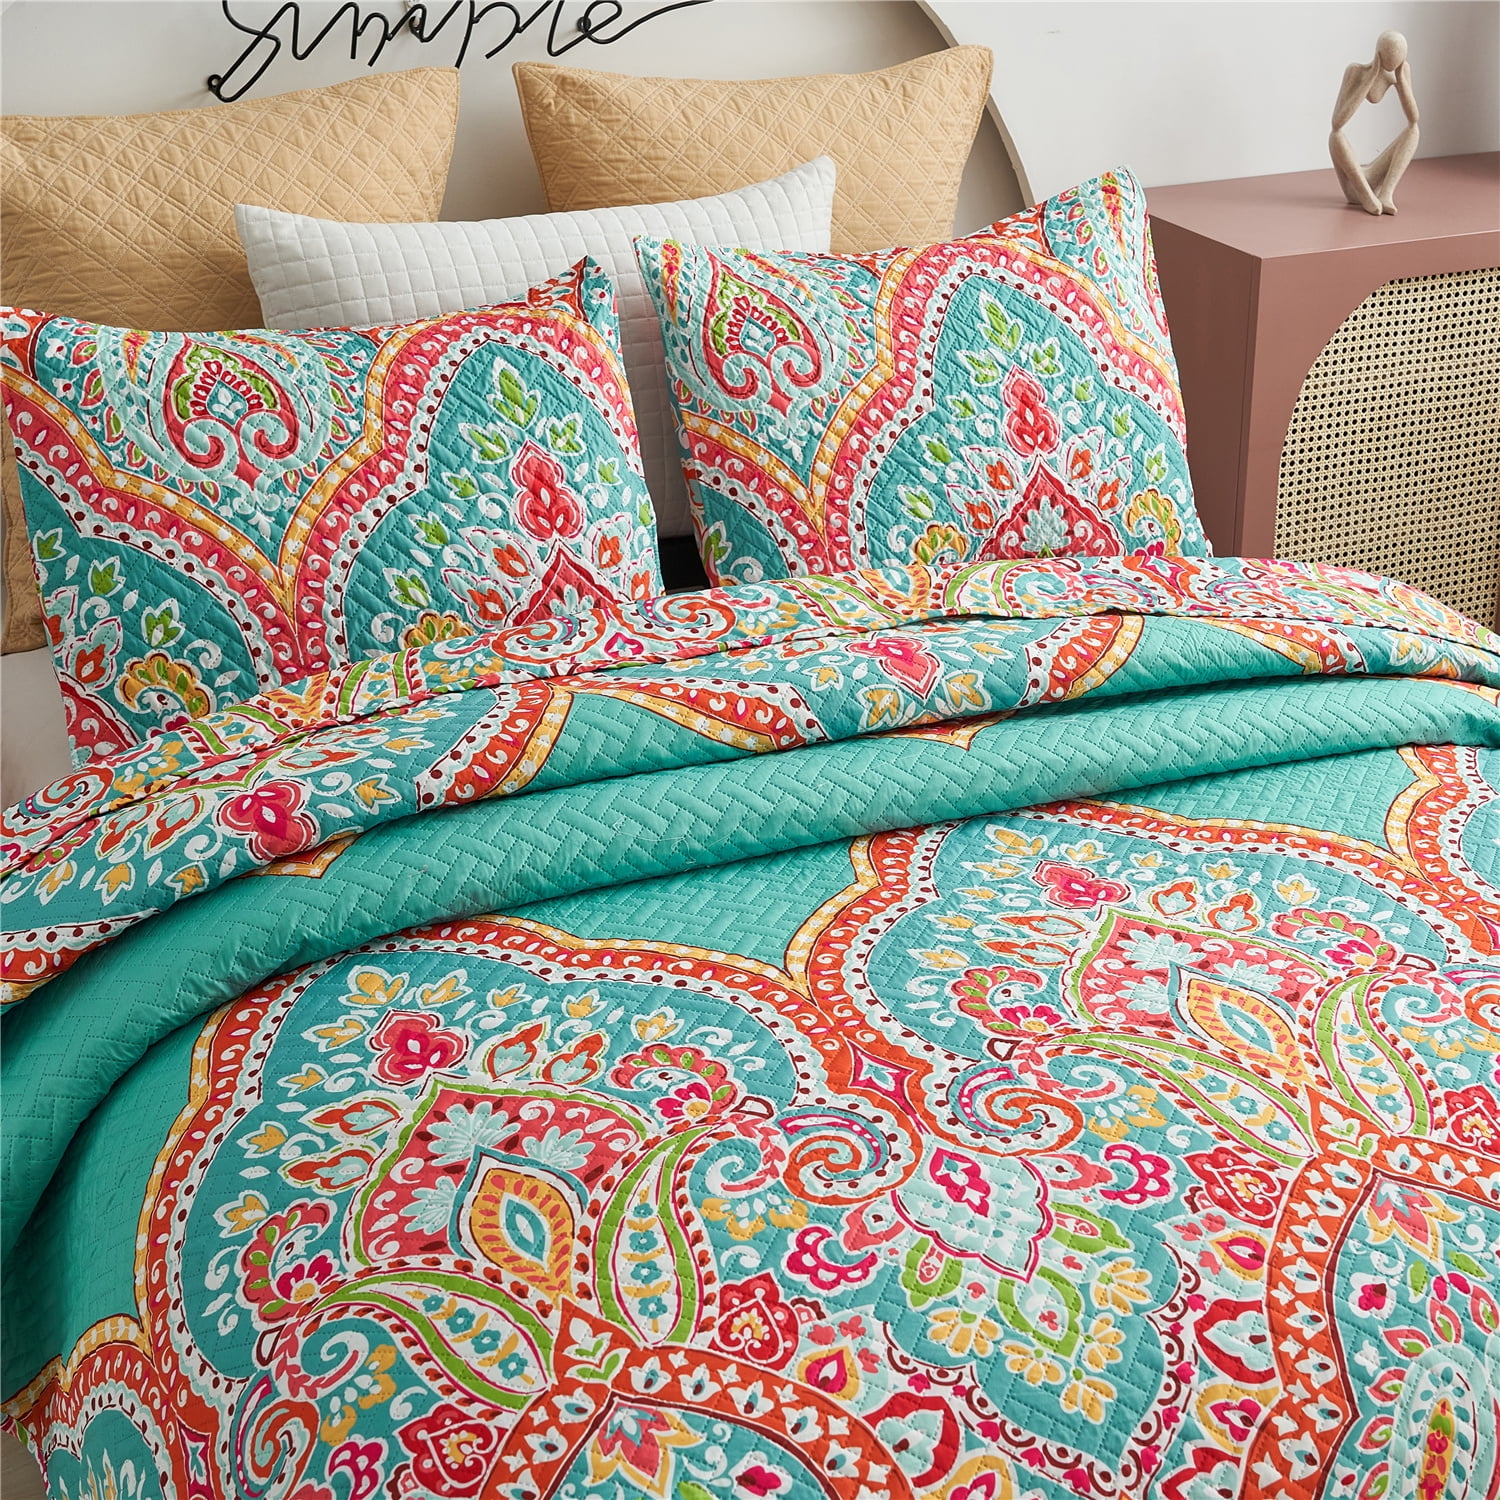 Details about   Reversible Paisley Striped Bedspread Full/Queen Size Quilt with 2 Shams 3-Piec 